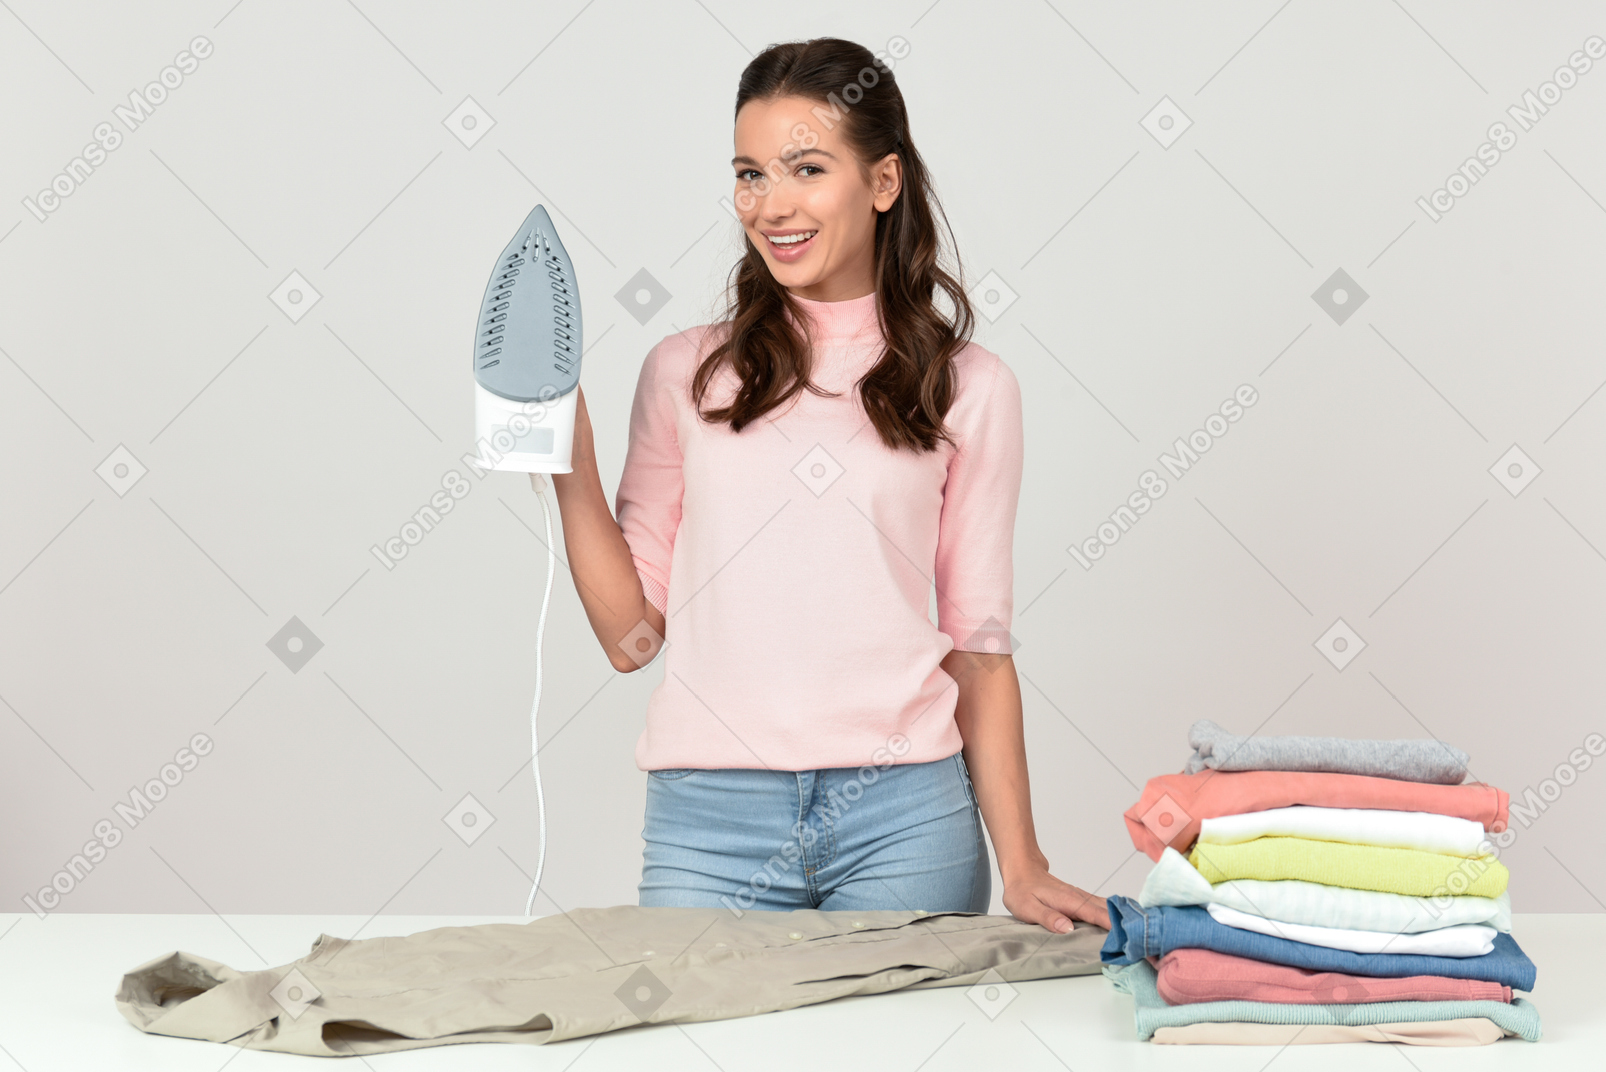 Attractive young woman with an iron looking pleased with herself